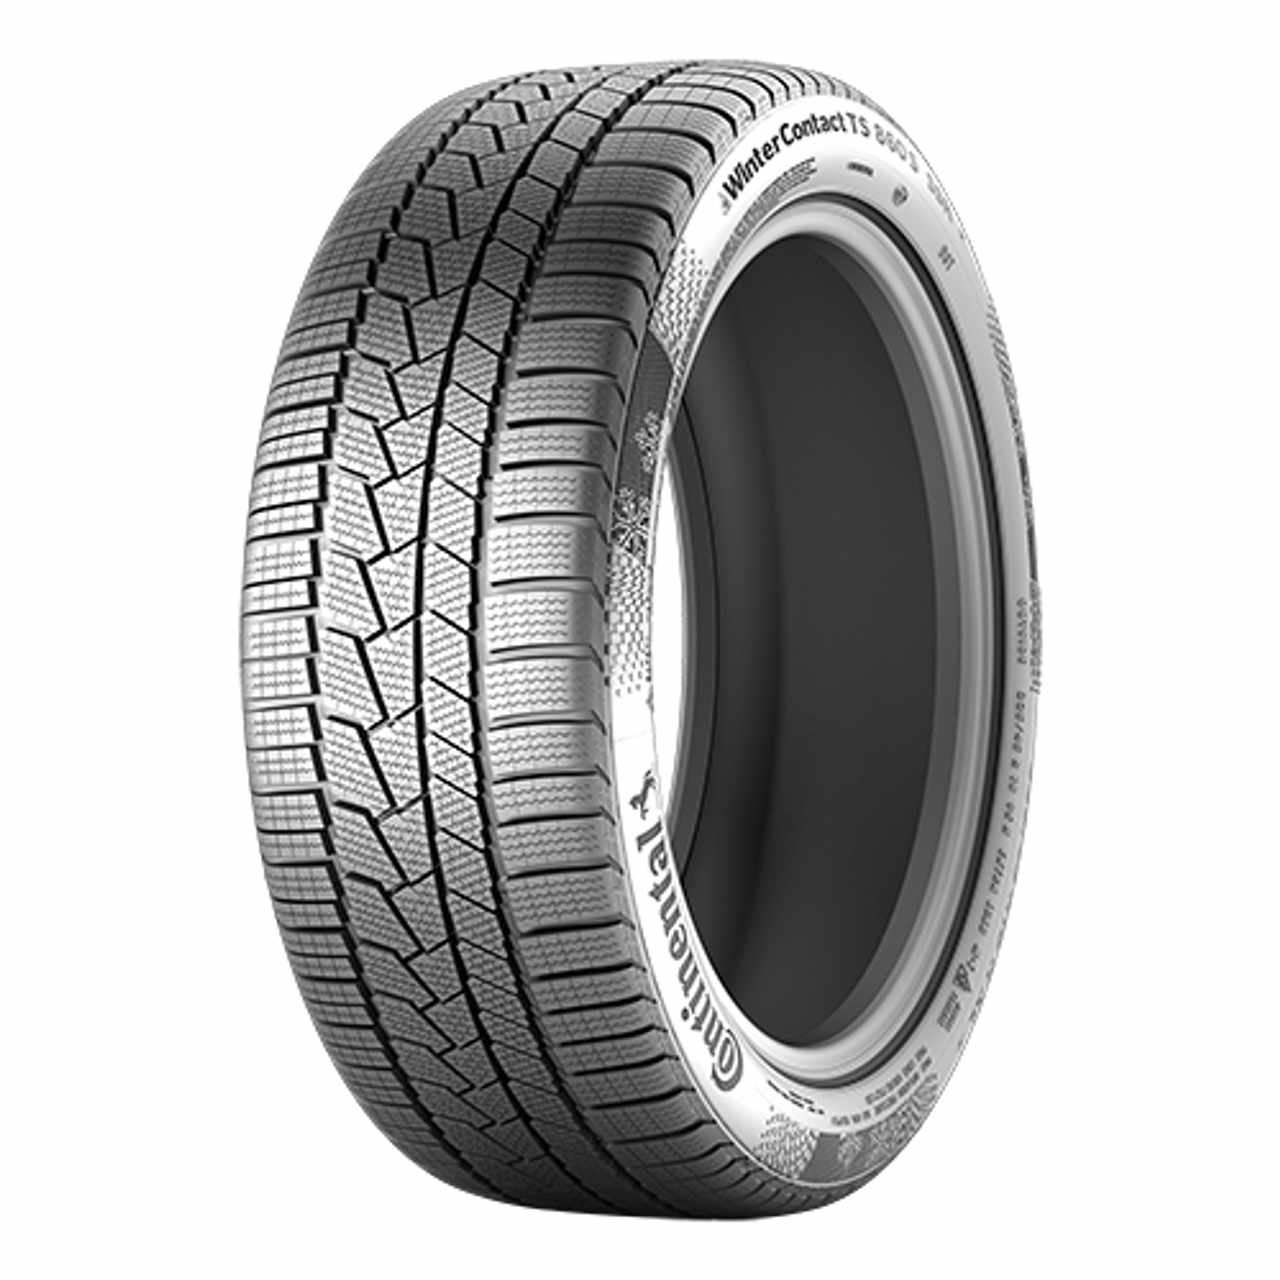 CONTINENTAL WINTERCONTACT TS 860 S (*) (EVc) 205/60R16 96H BSW